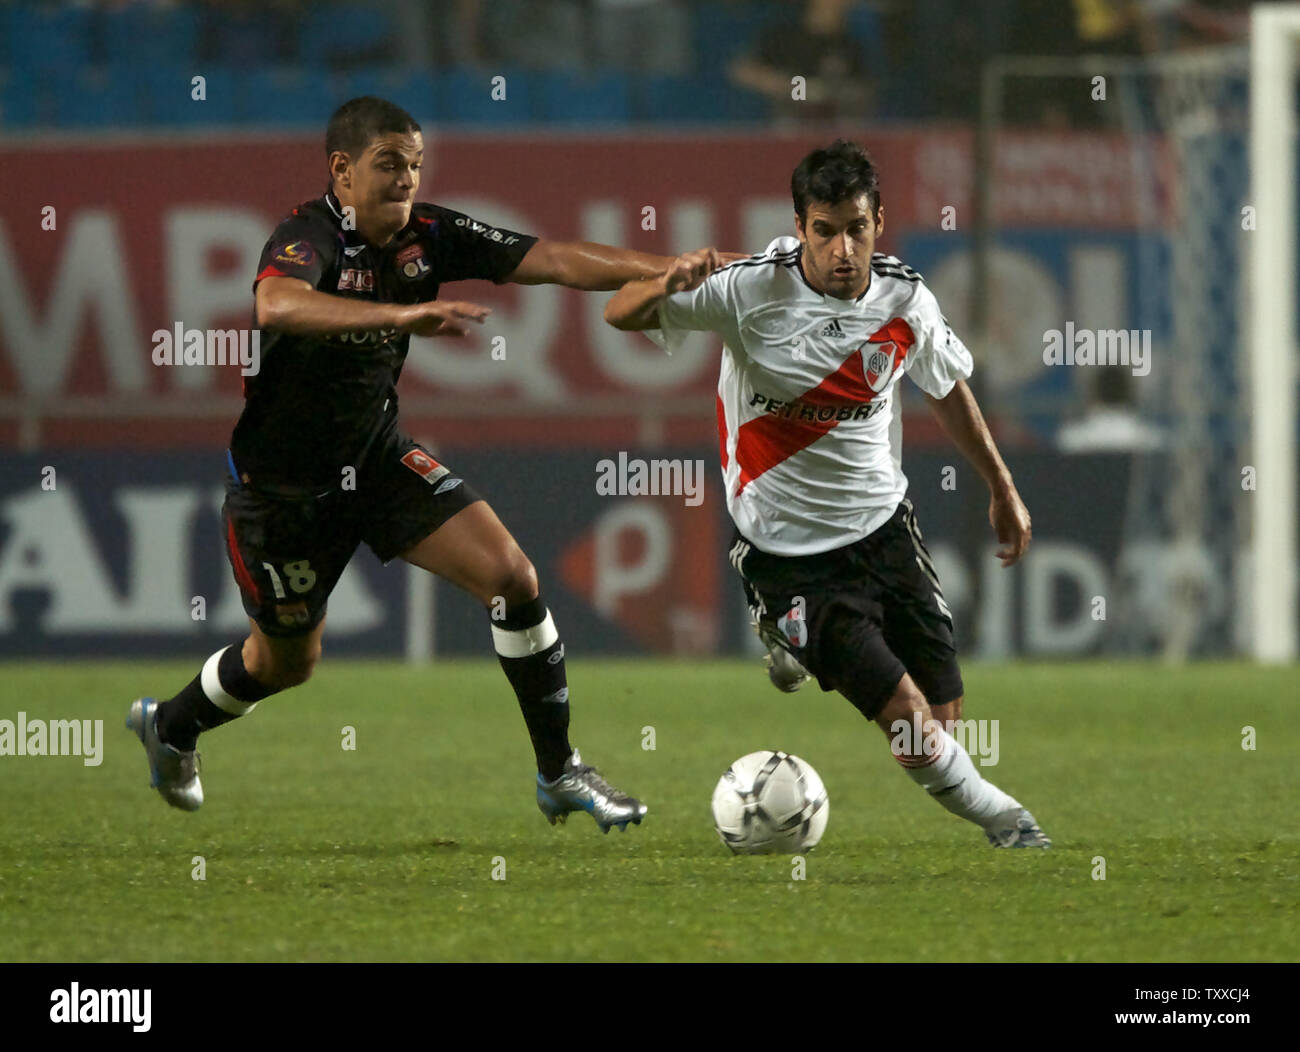 Hatem Ben Arfa (L) of Lyonnais, France, struggles for the ball with Ferrari (R) of River Plate, Argentine, in the second half on the sixth day of the Peace Cup Korea 2007 at the Suwon Worldcup Stadium, South Korea, on July 19, 2007. Lyonnais beat River Plate 3-1. (UPI Photo/Keizo Mori) Stock Photo